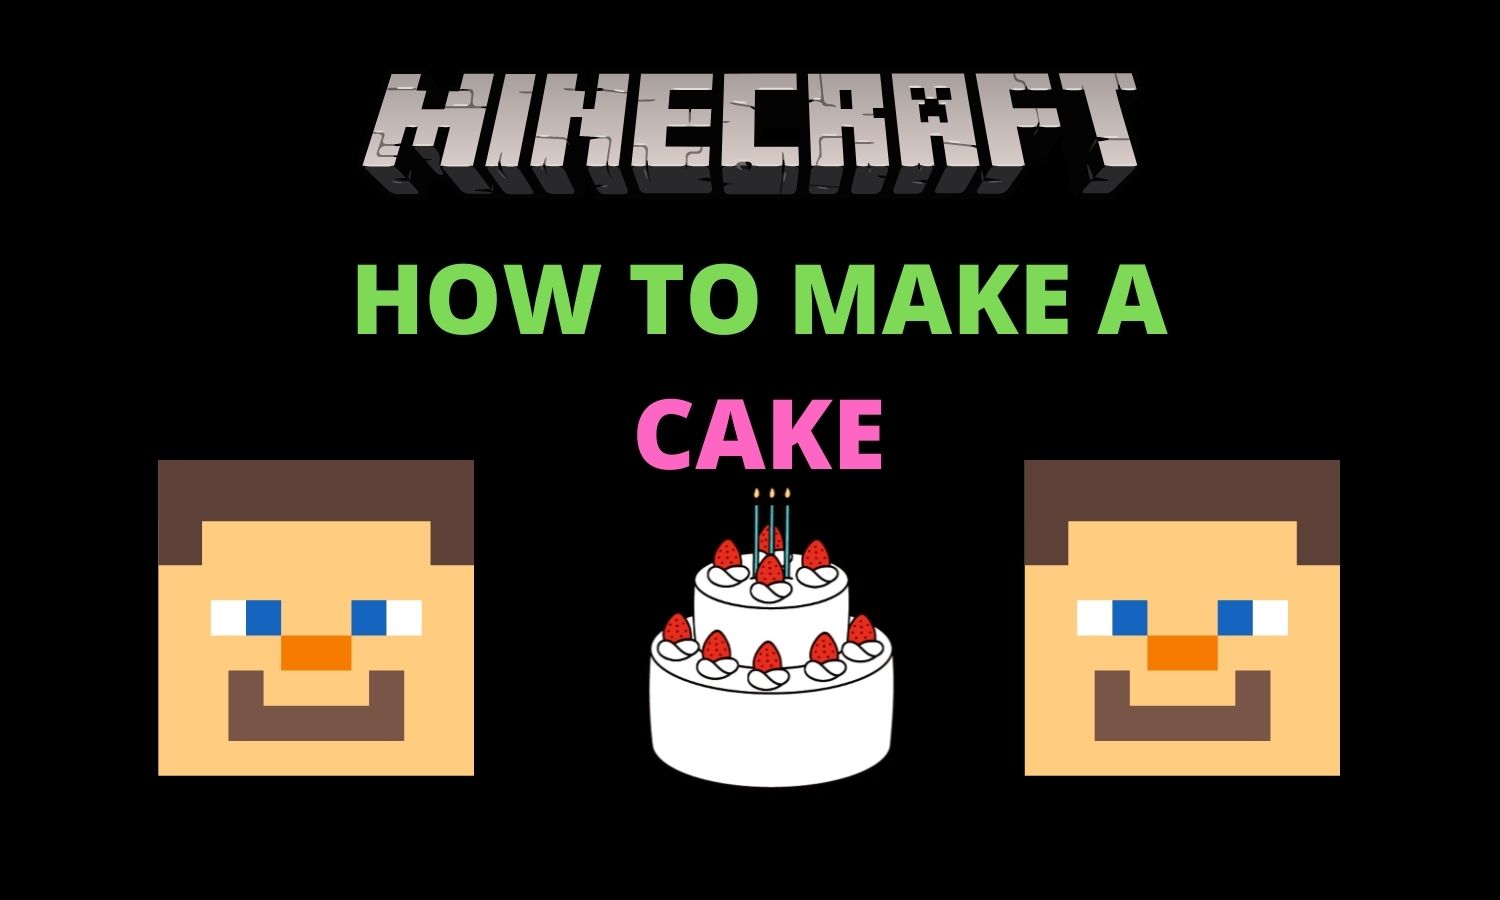 HOW TO MAKE A CAKE IN MINECRAFT